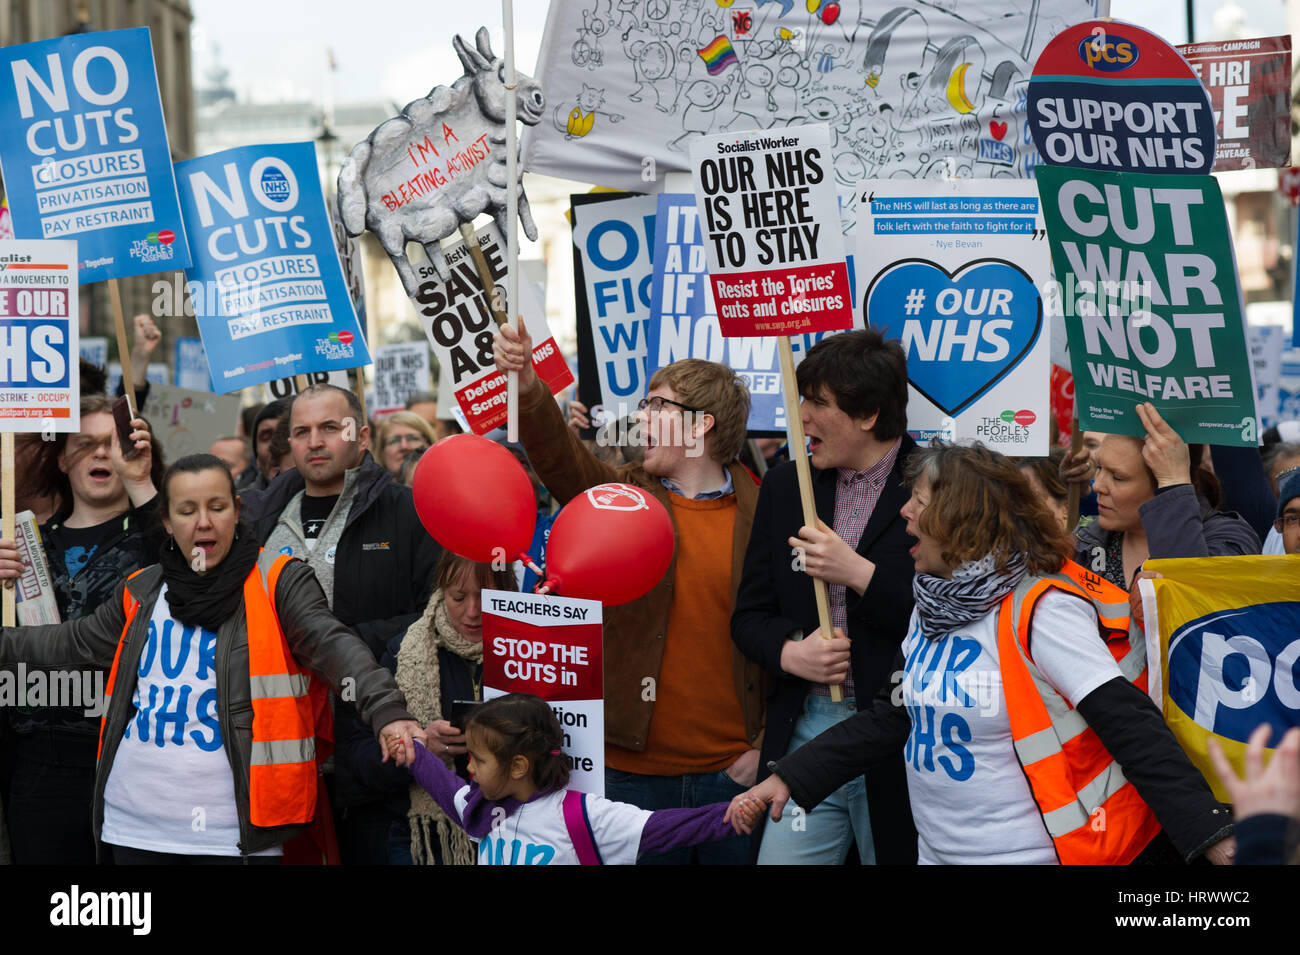 London, England, UK.  4th March 2017.  Several people turned out to protest against the government’s plans to make cuts, the closure and privatisation of the NHS. The march was from Tavistock to Parliement Square in London. Andrew Steven Graham/Alamy Live News Stock Photo